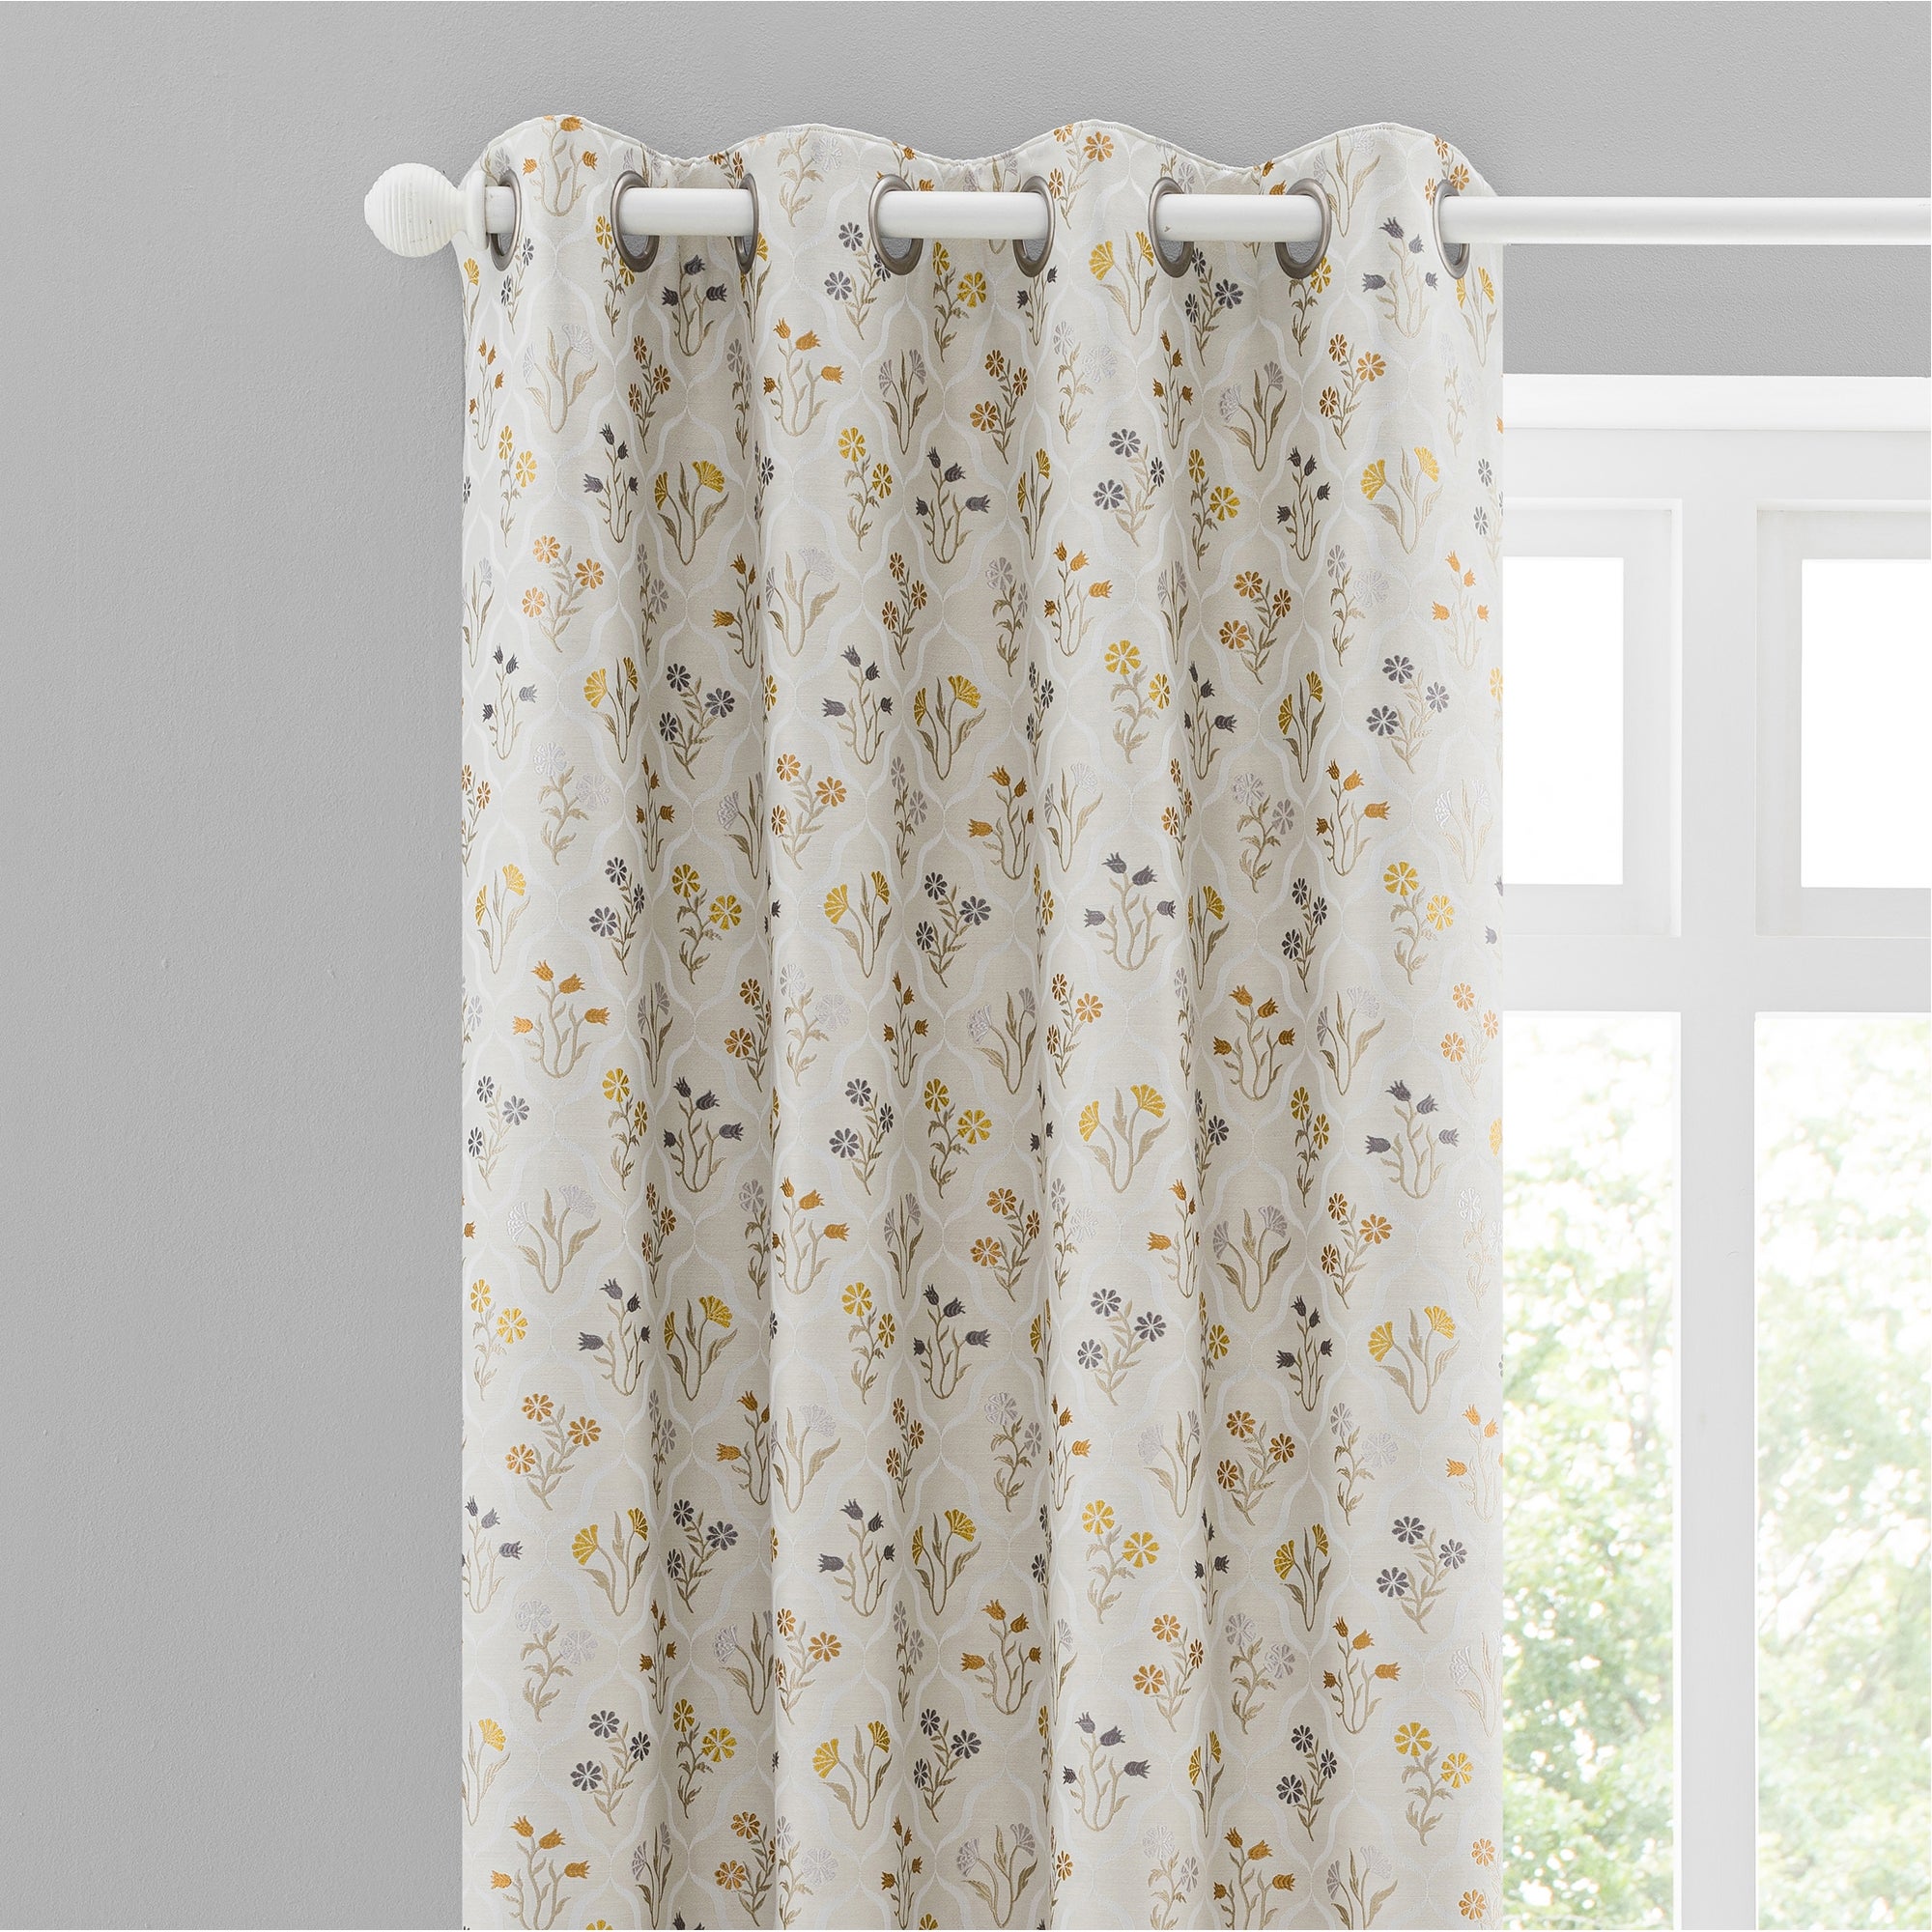 Fleur Floral Jacquard Ochre Eyelet Curtains Cream Yellow and Blue